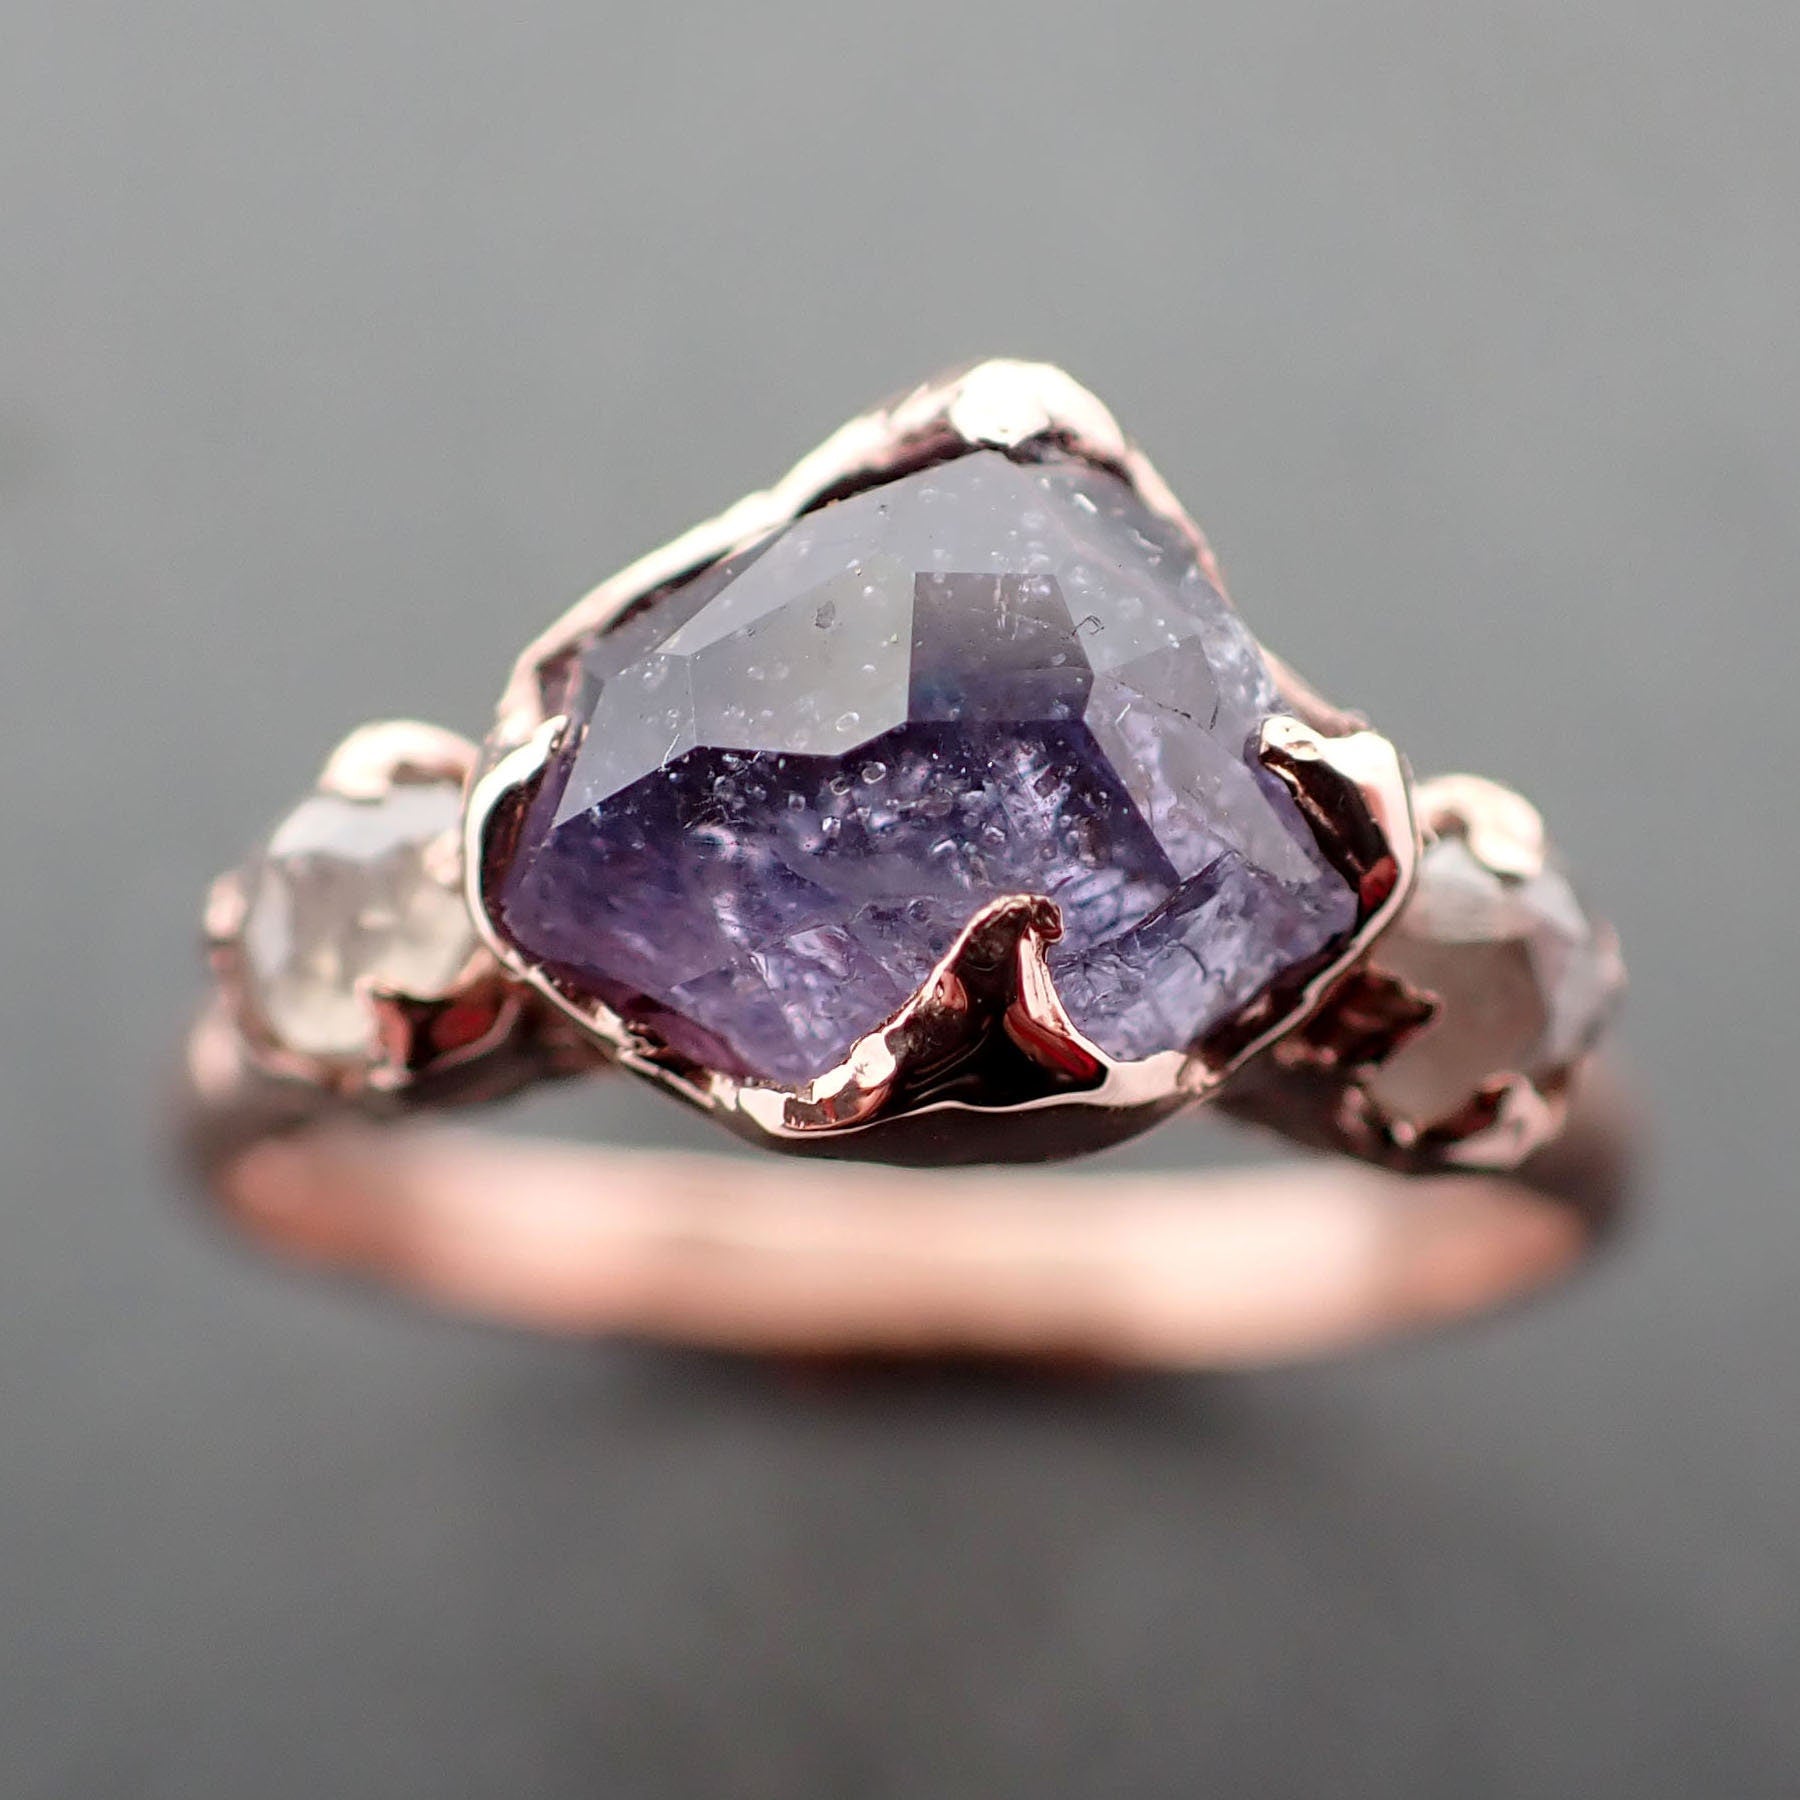 Partially Faceted Sapphire Raw Multi stone Rough Diamond 14k rose Gold Engagement Ring Wedding Ring Custom One Of a Kind Gemstone Ring 3423